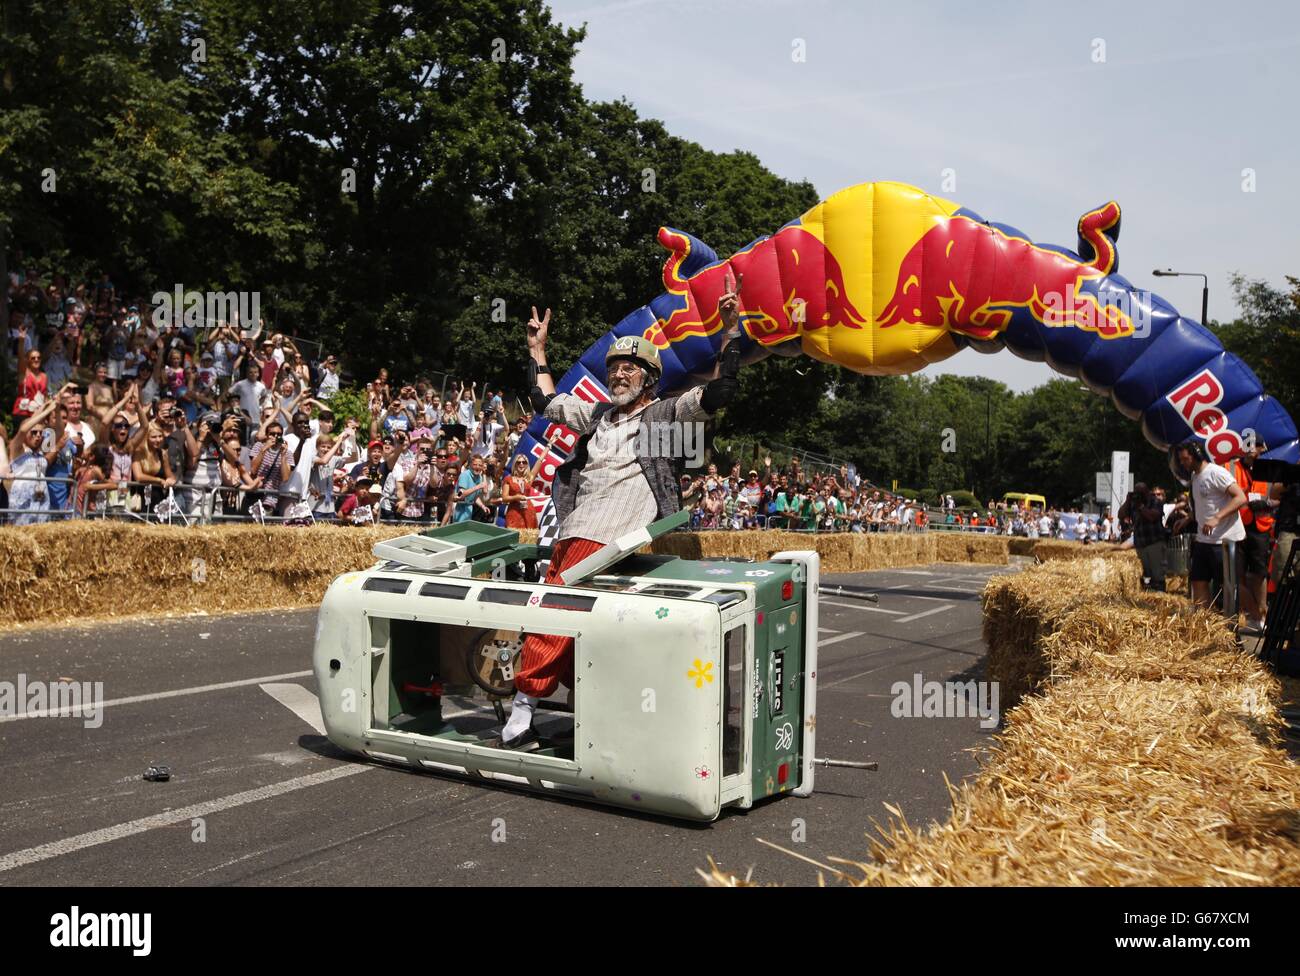 . The Hippy Split Camper Van Team, one of 70 gravity powered vehicles taking part in The Red Bull Soapbox Race at London's Alexandra Palace. Stock Photo